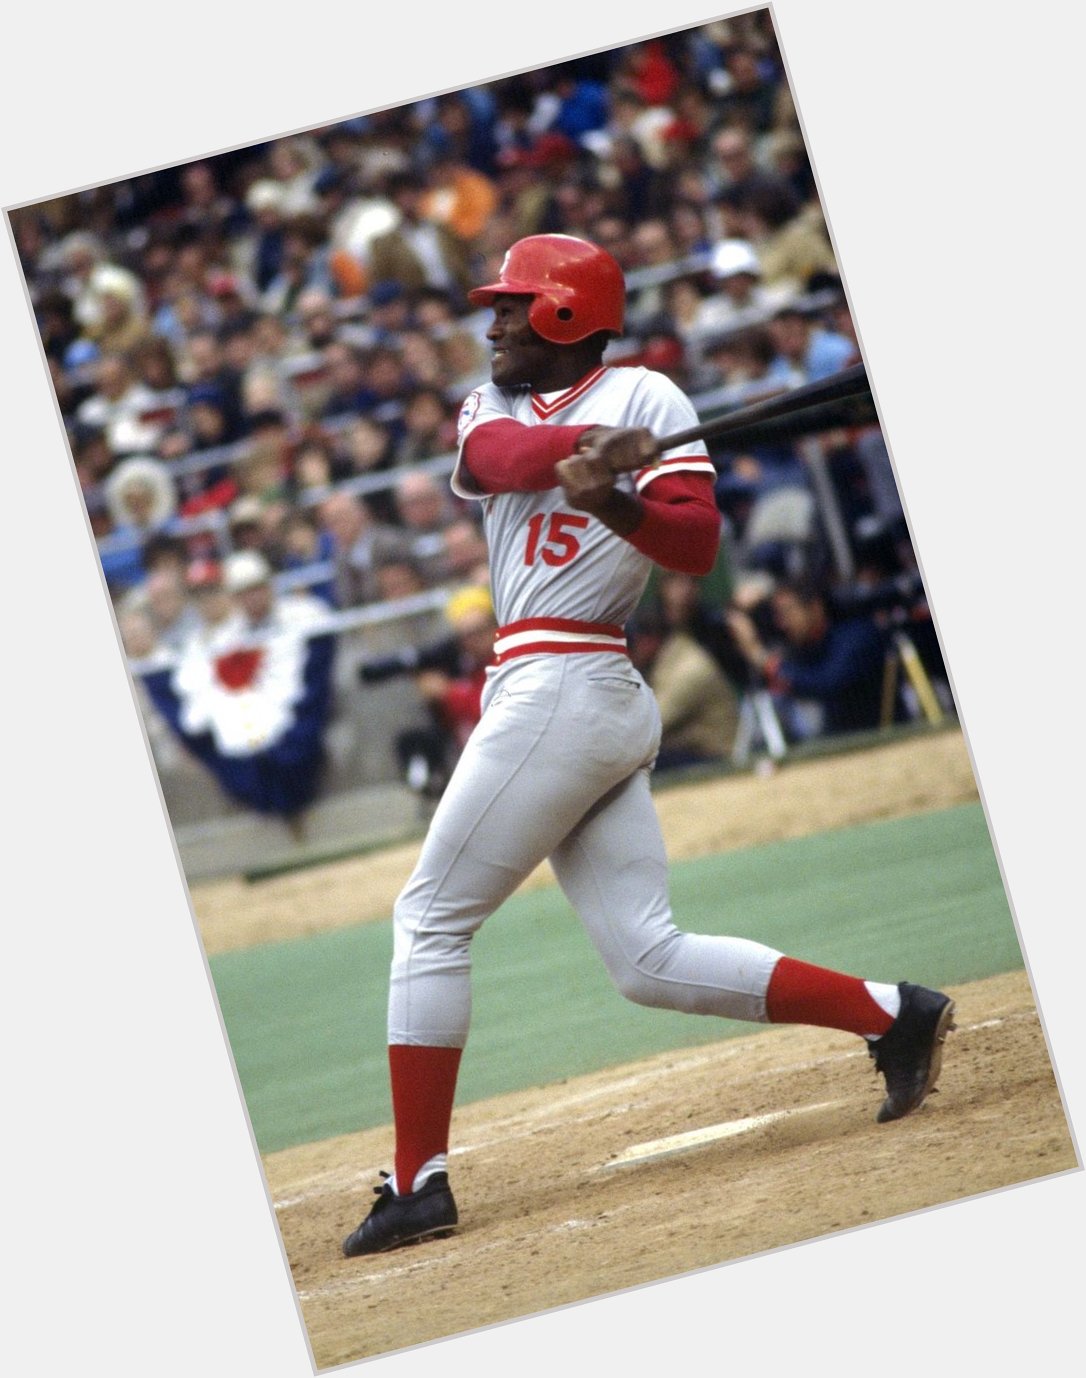 Happy Birthday, George Foster. Turns 69 today.  18 years in MLB. NL MVP 1977.   Played in 3 World Series w/Reds. 